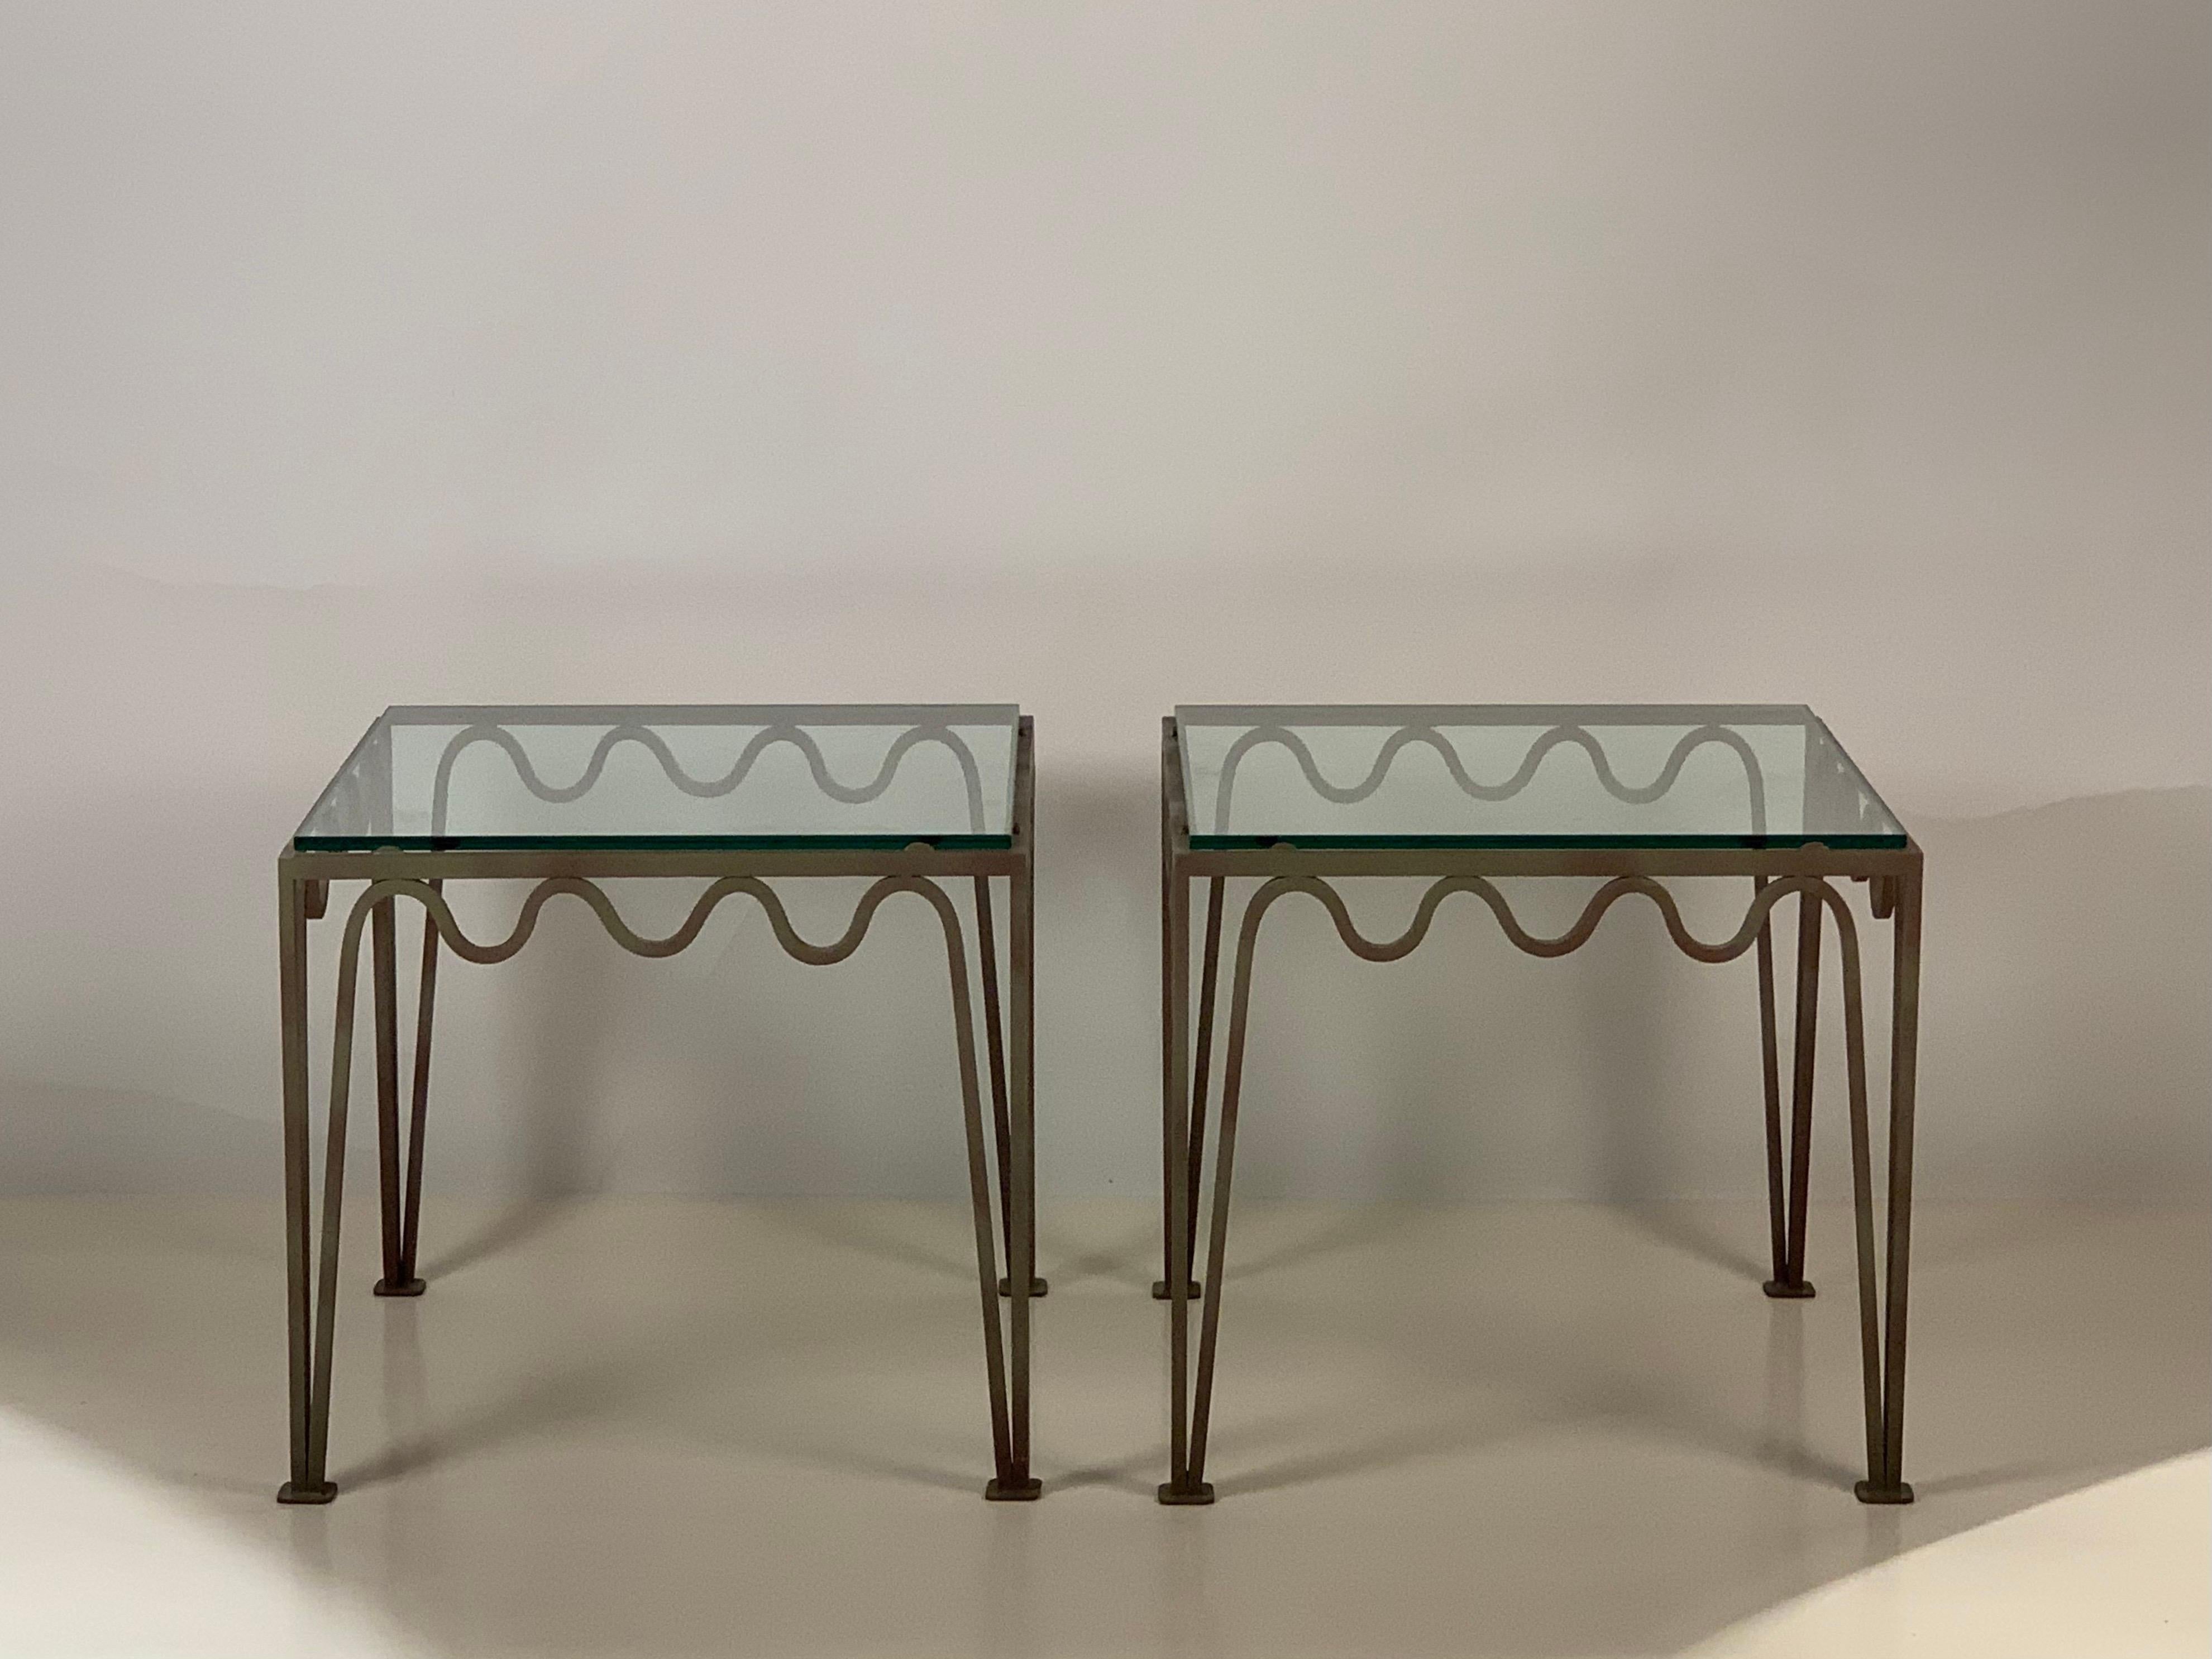 Undulating 'Méandre' verdigris iron and glass side or end tables by DESIGN FRÈRES.

Chic and understated.